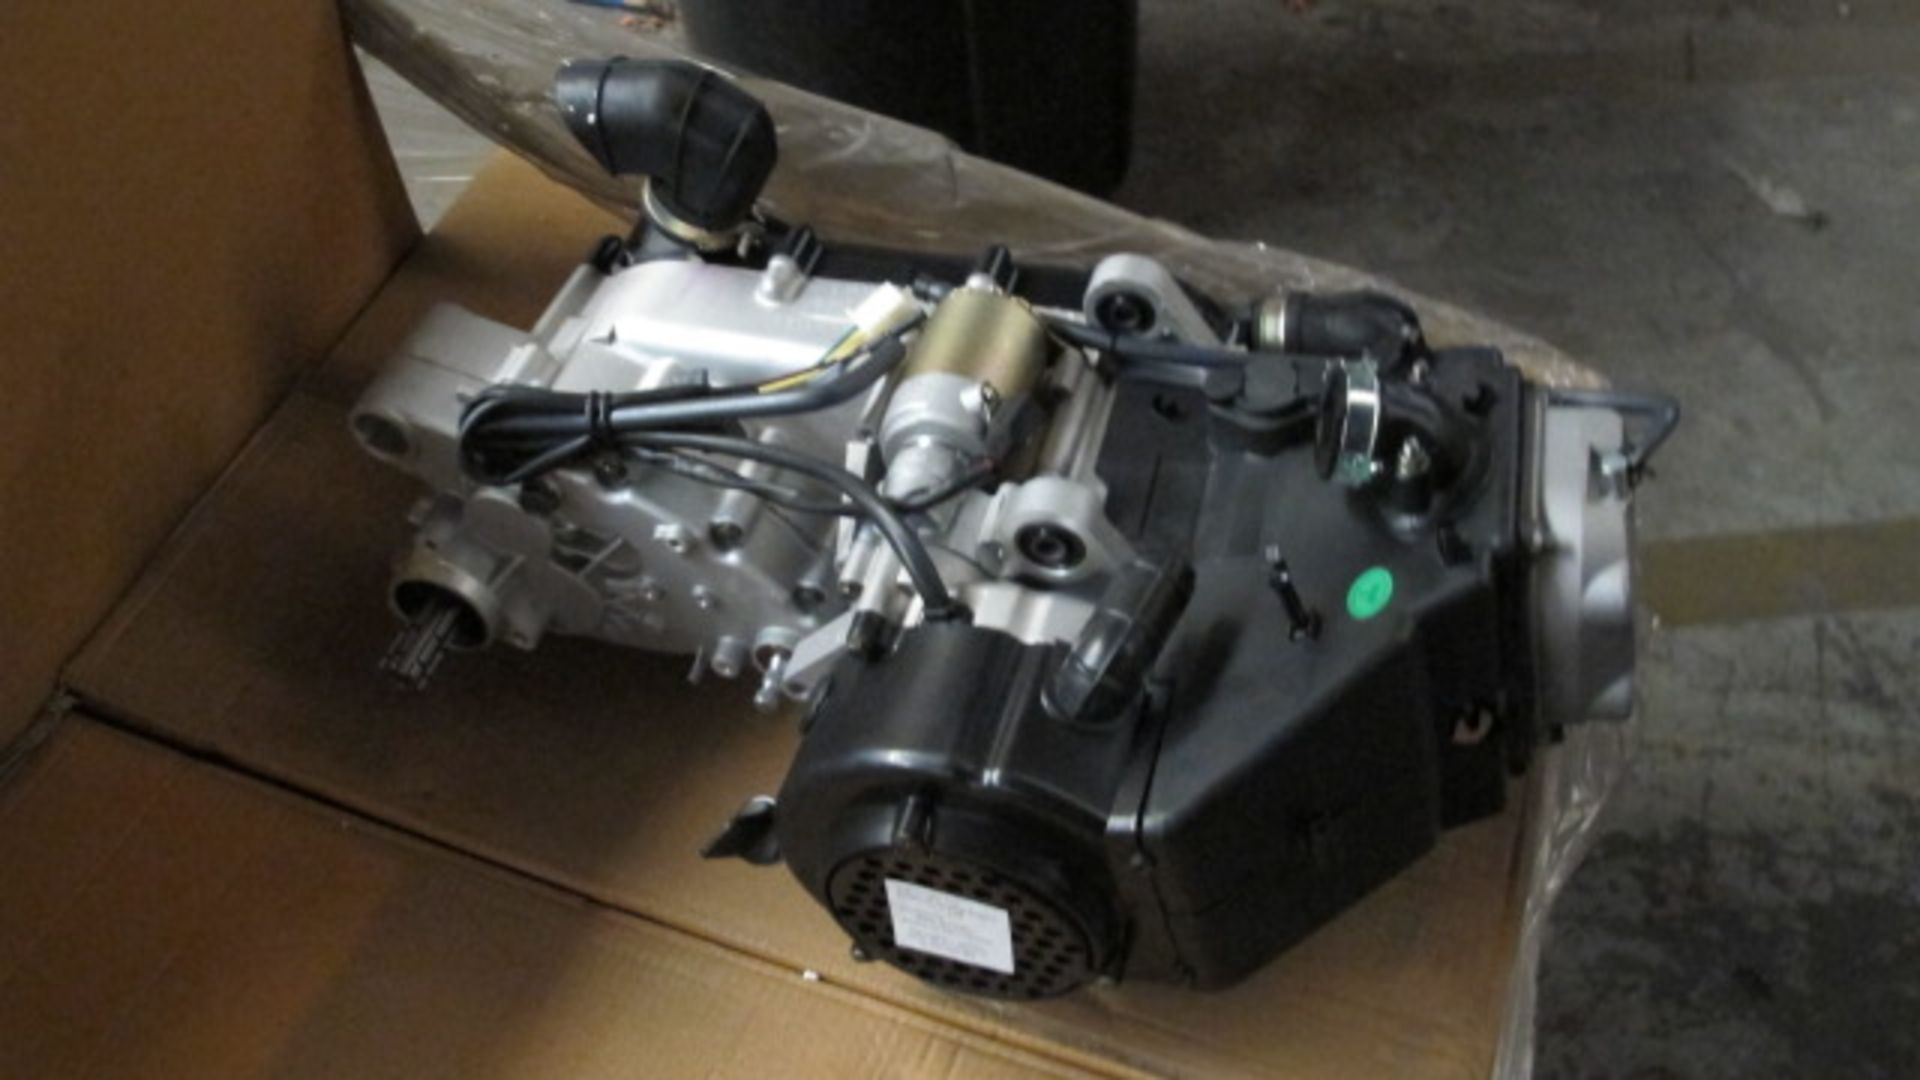 150CC ENGINE ASSEMBLY KIT (ENGINE ONLY) MANUFACTURED BY: ZHEJIANG JINLANG ENGINE CO. LTD